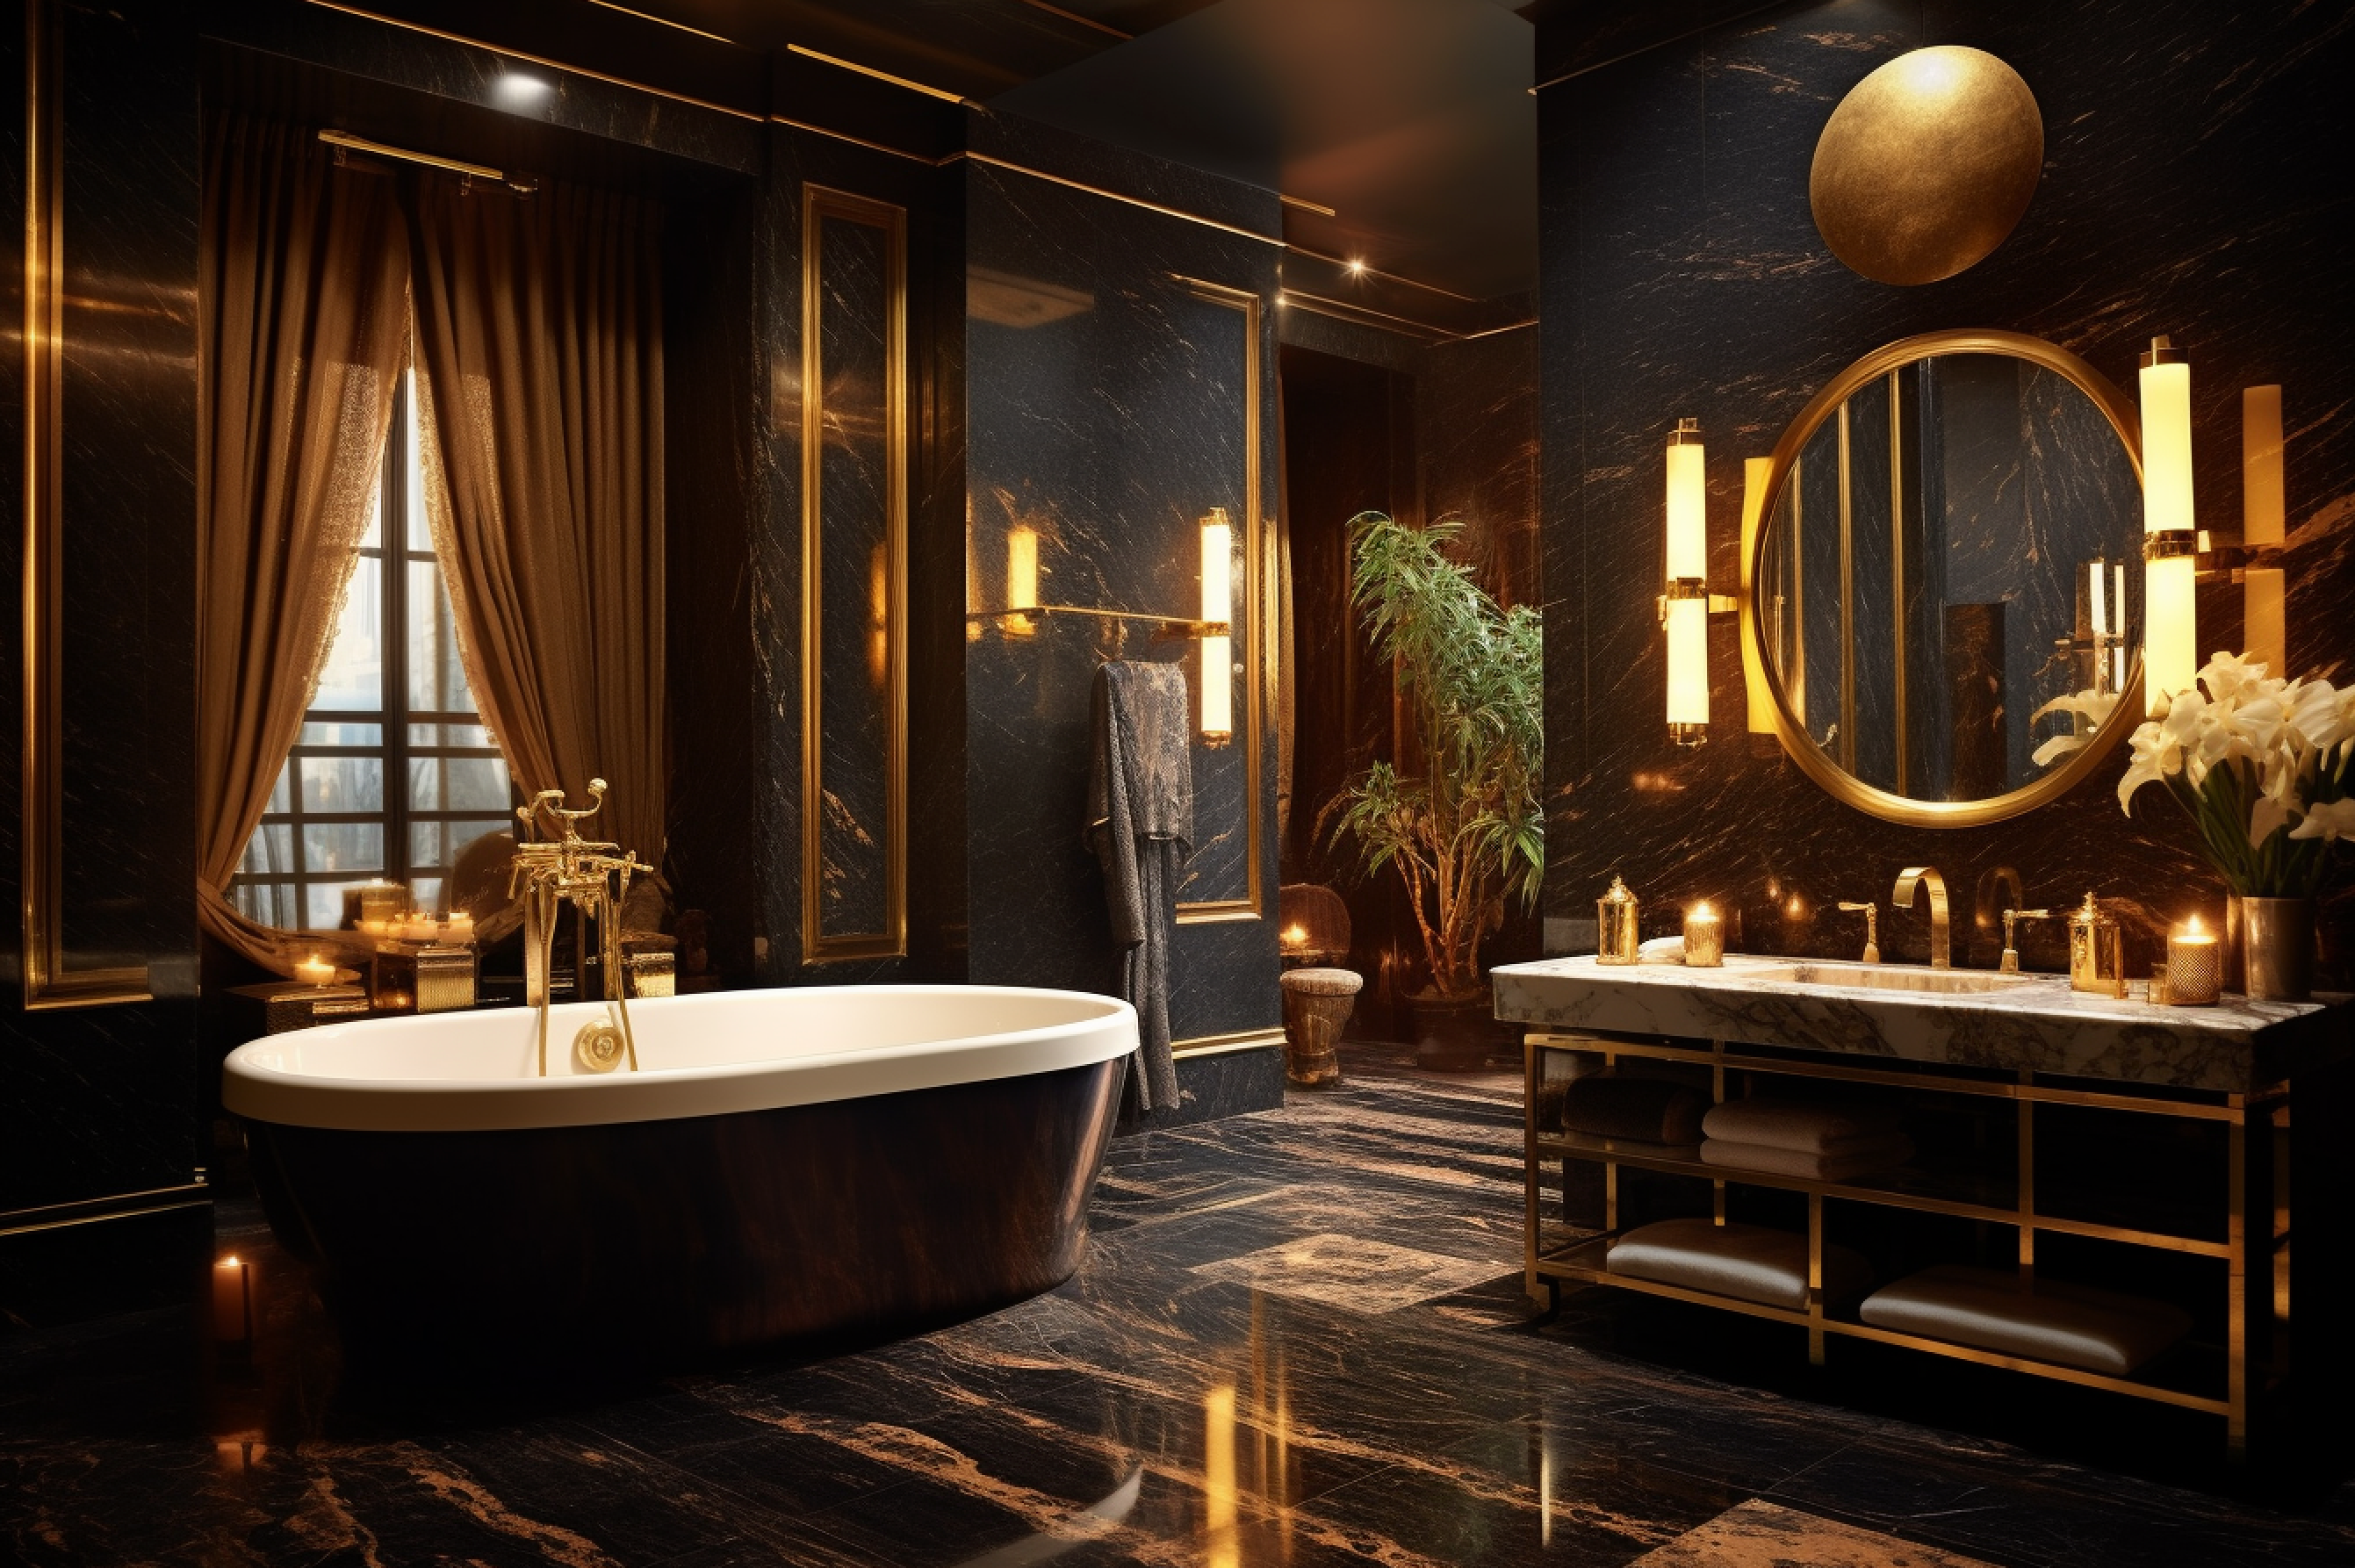 Snapshot of a luxurious bathroom with chocolate brown marbled walls and gold dust fixtures.